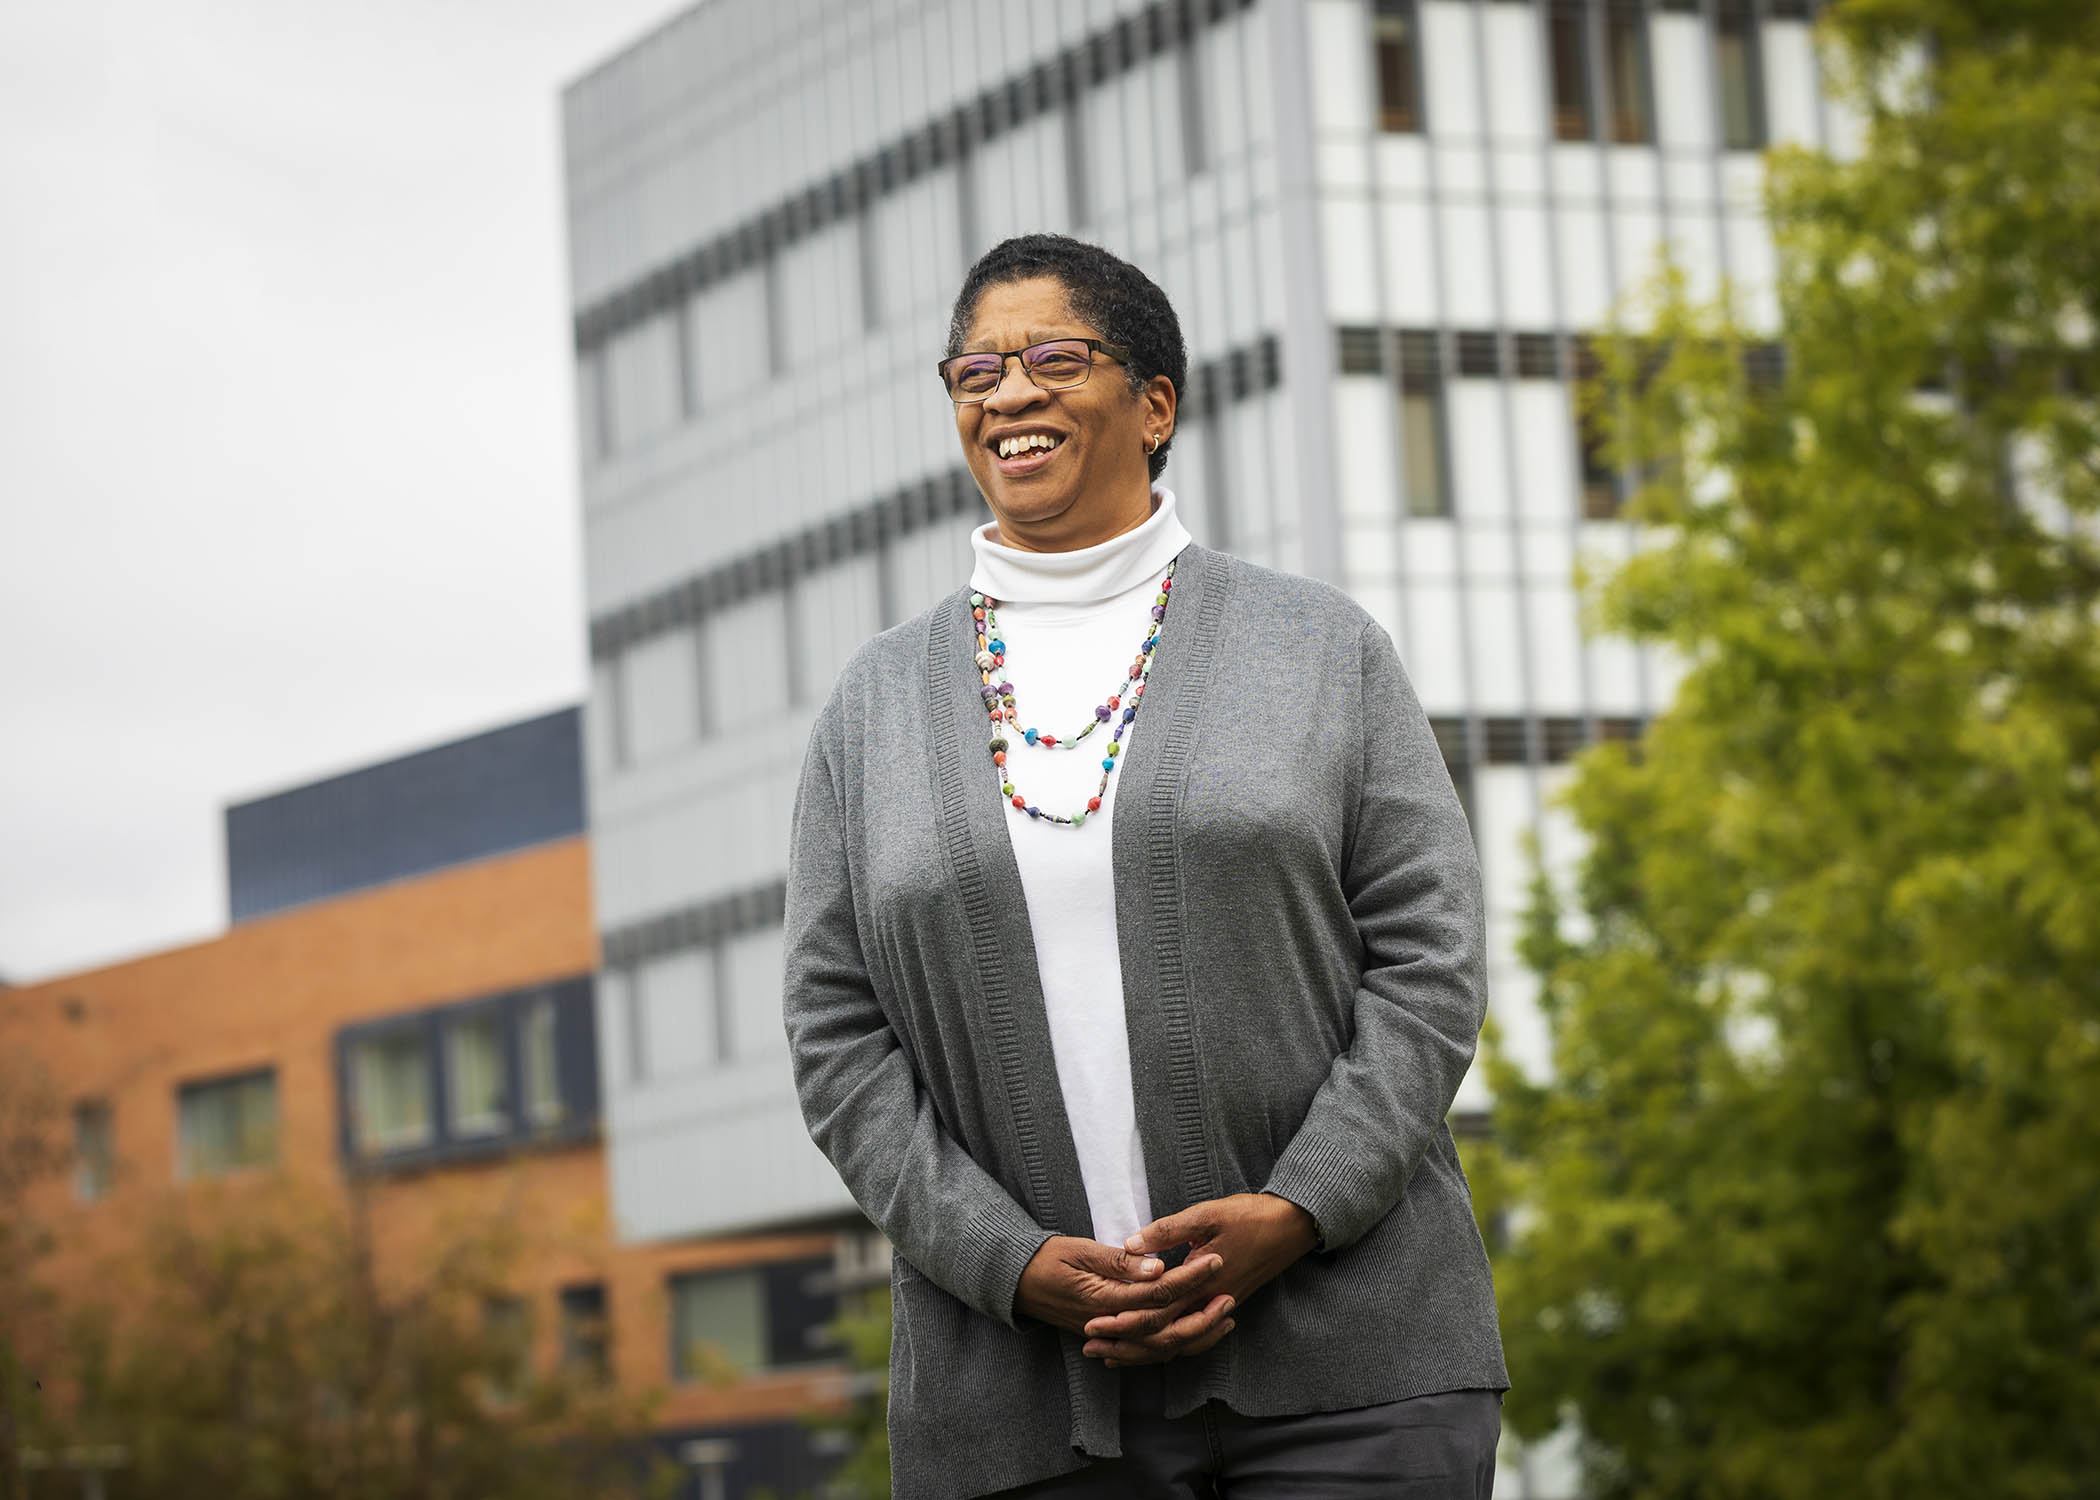 Kinesiology professor Camille O'Bryant smiles for a professional portrait outside on campus. She is wearing a white shirt and a gray cardigan.